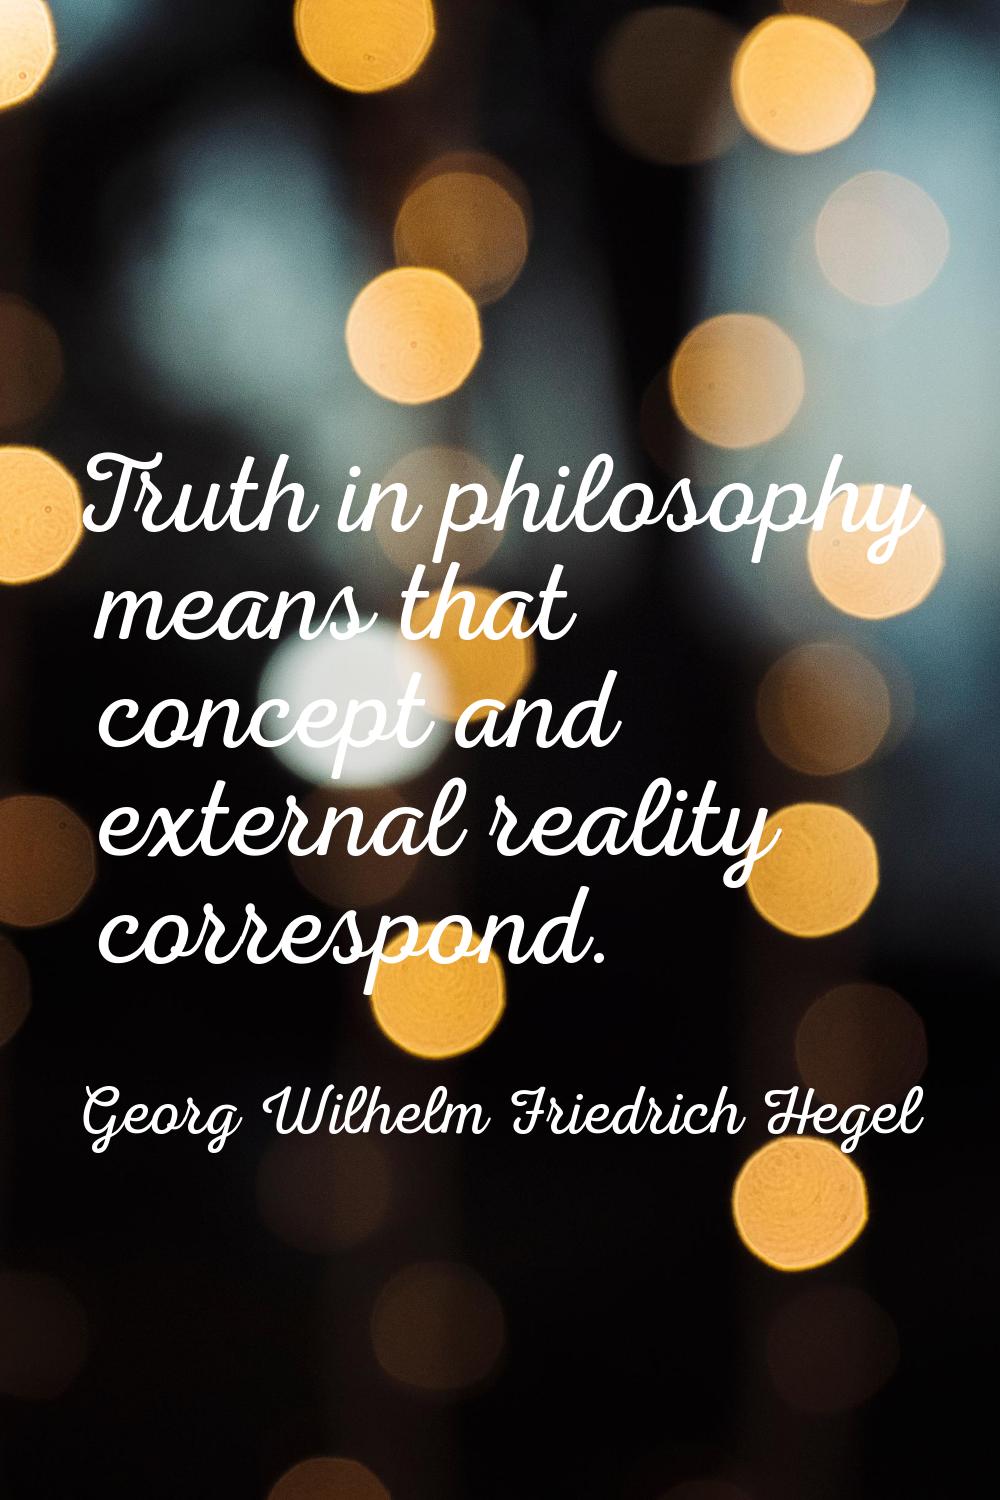 Truth in philosophy means that concept and external reality correspond.